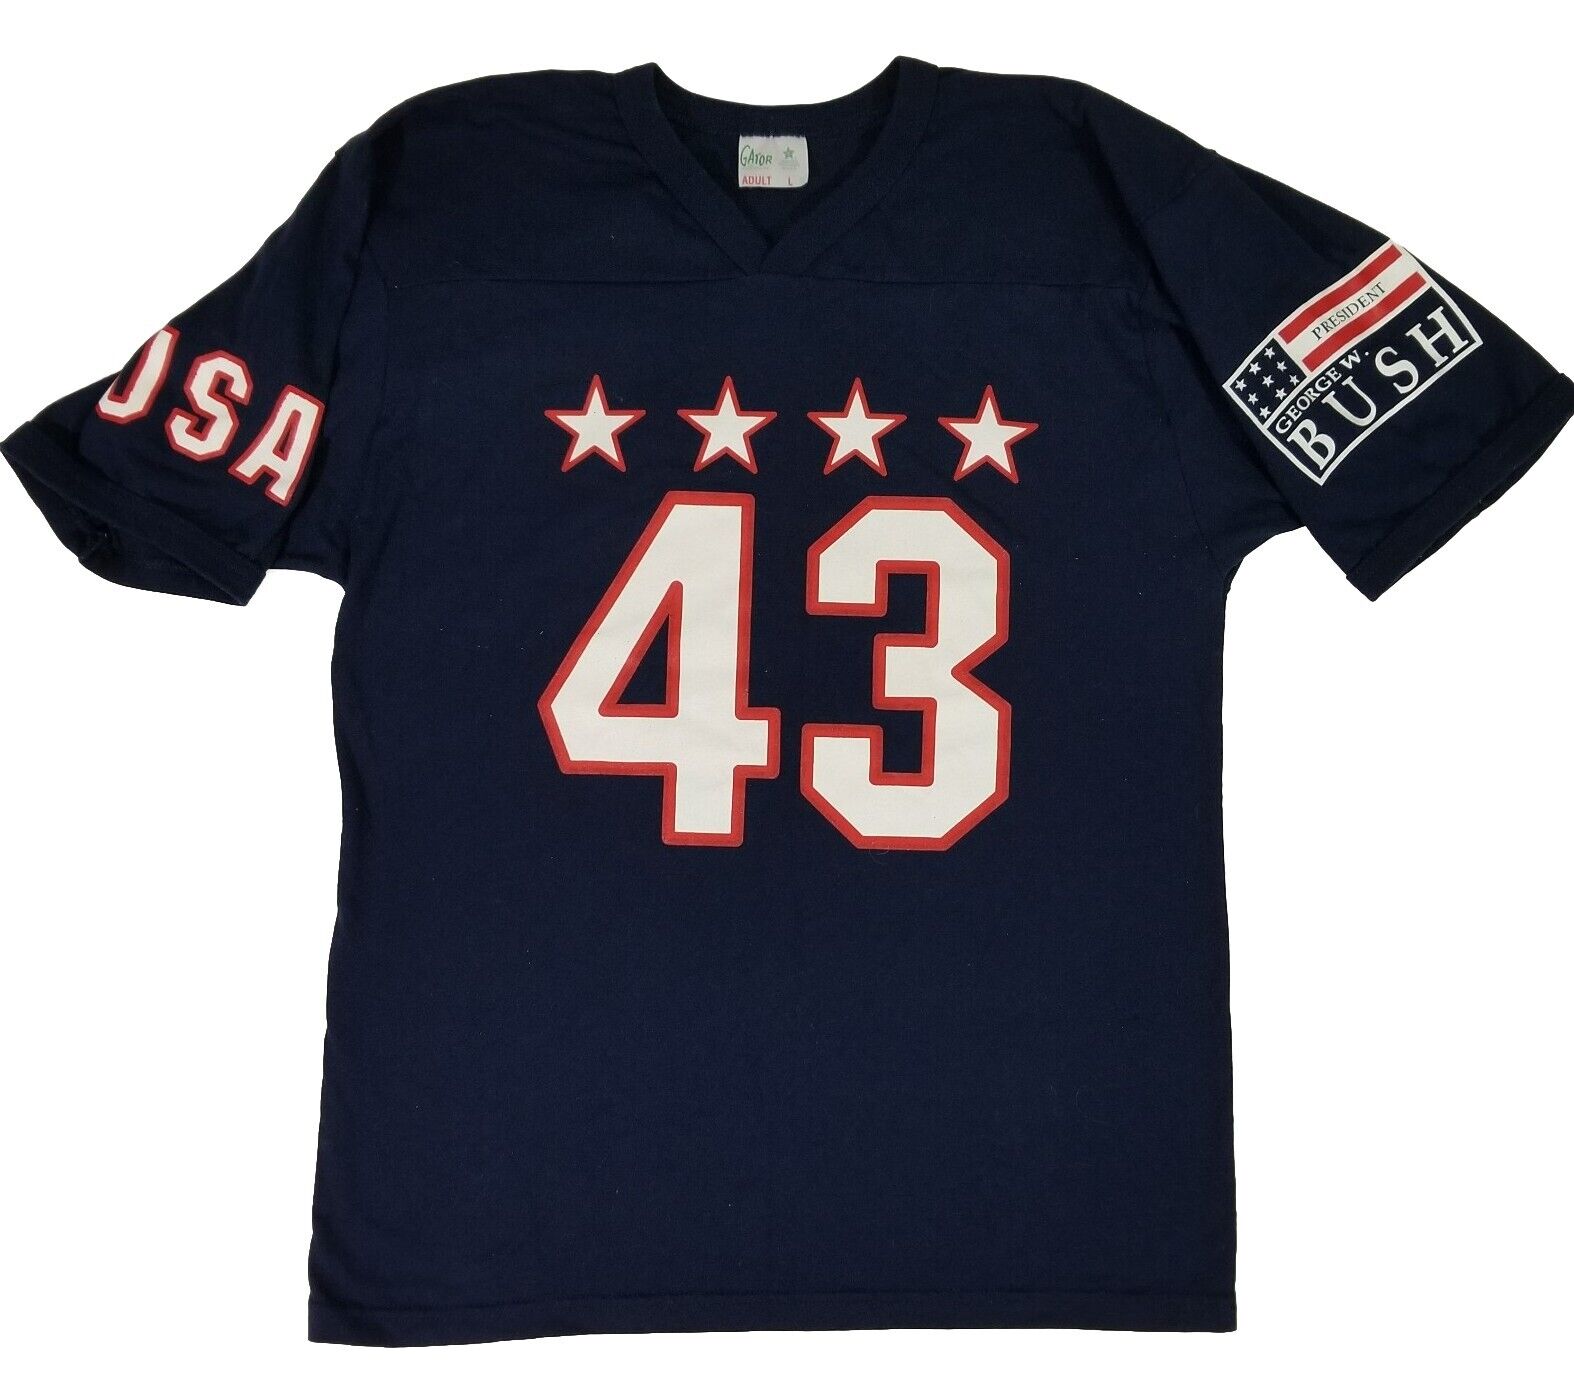 President George W Bush #43 Jersey Style T-Shirt by Gator Adult L USA Made 2000